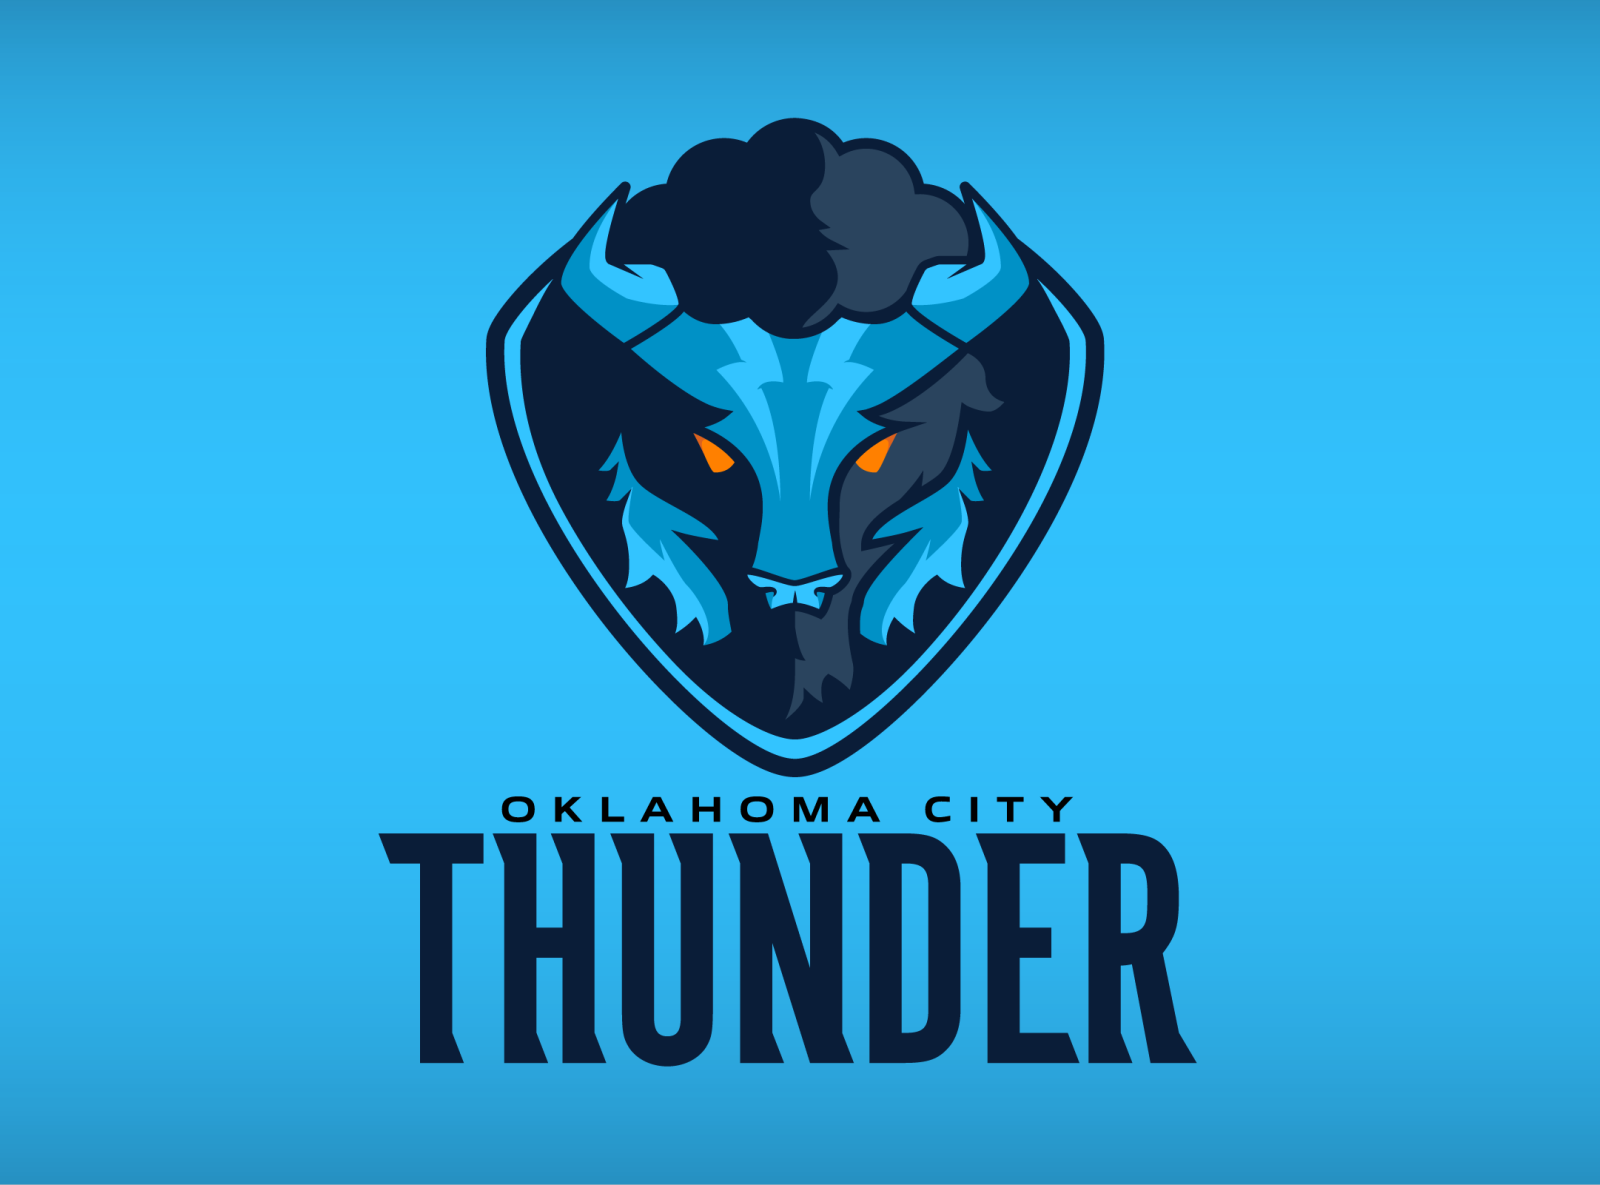 Browse thousands of Oklahoma City Thunder images for design inspiration